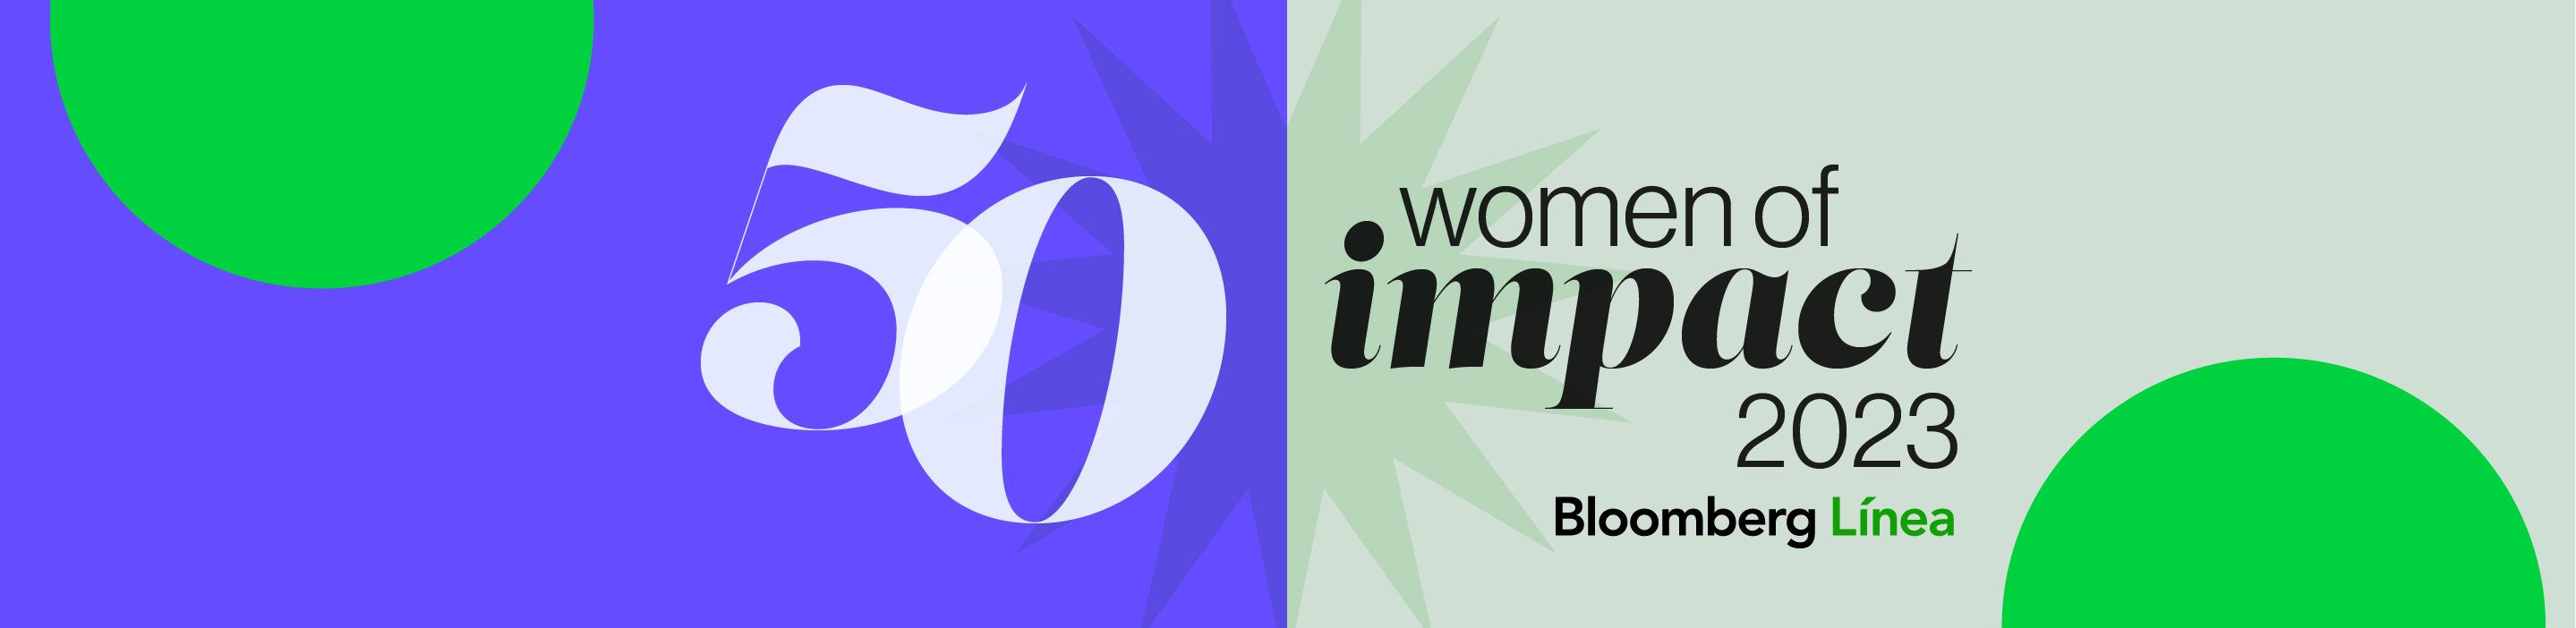 List of the 50 Women of Impact in Latin America in 2023